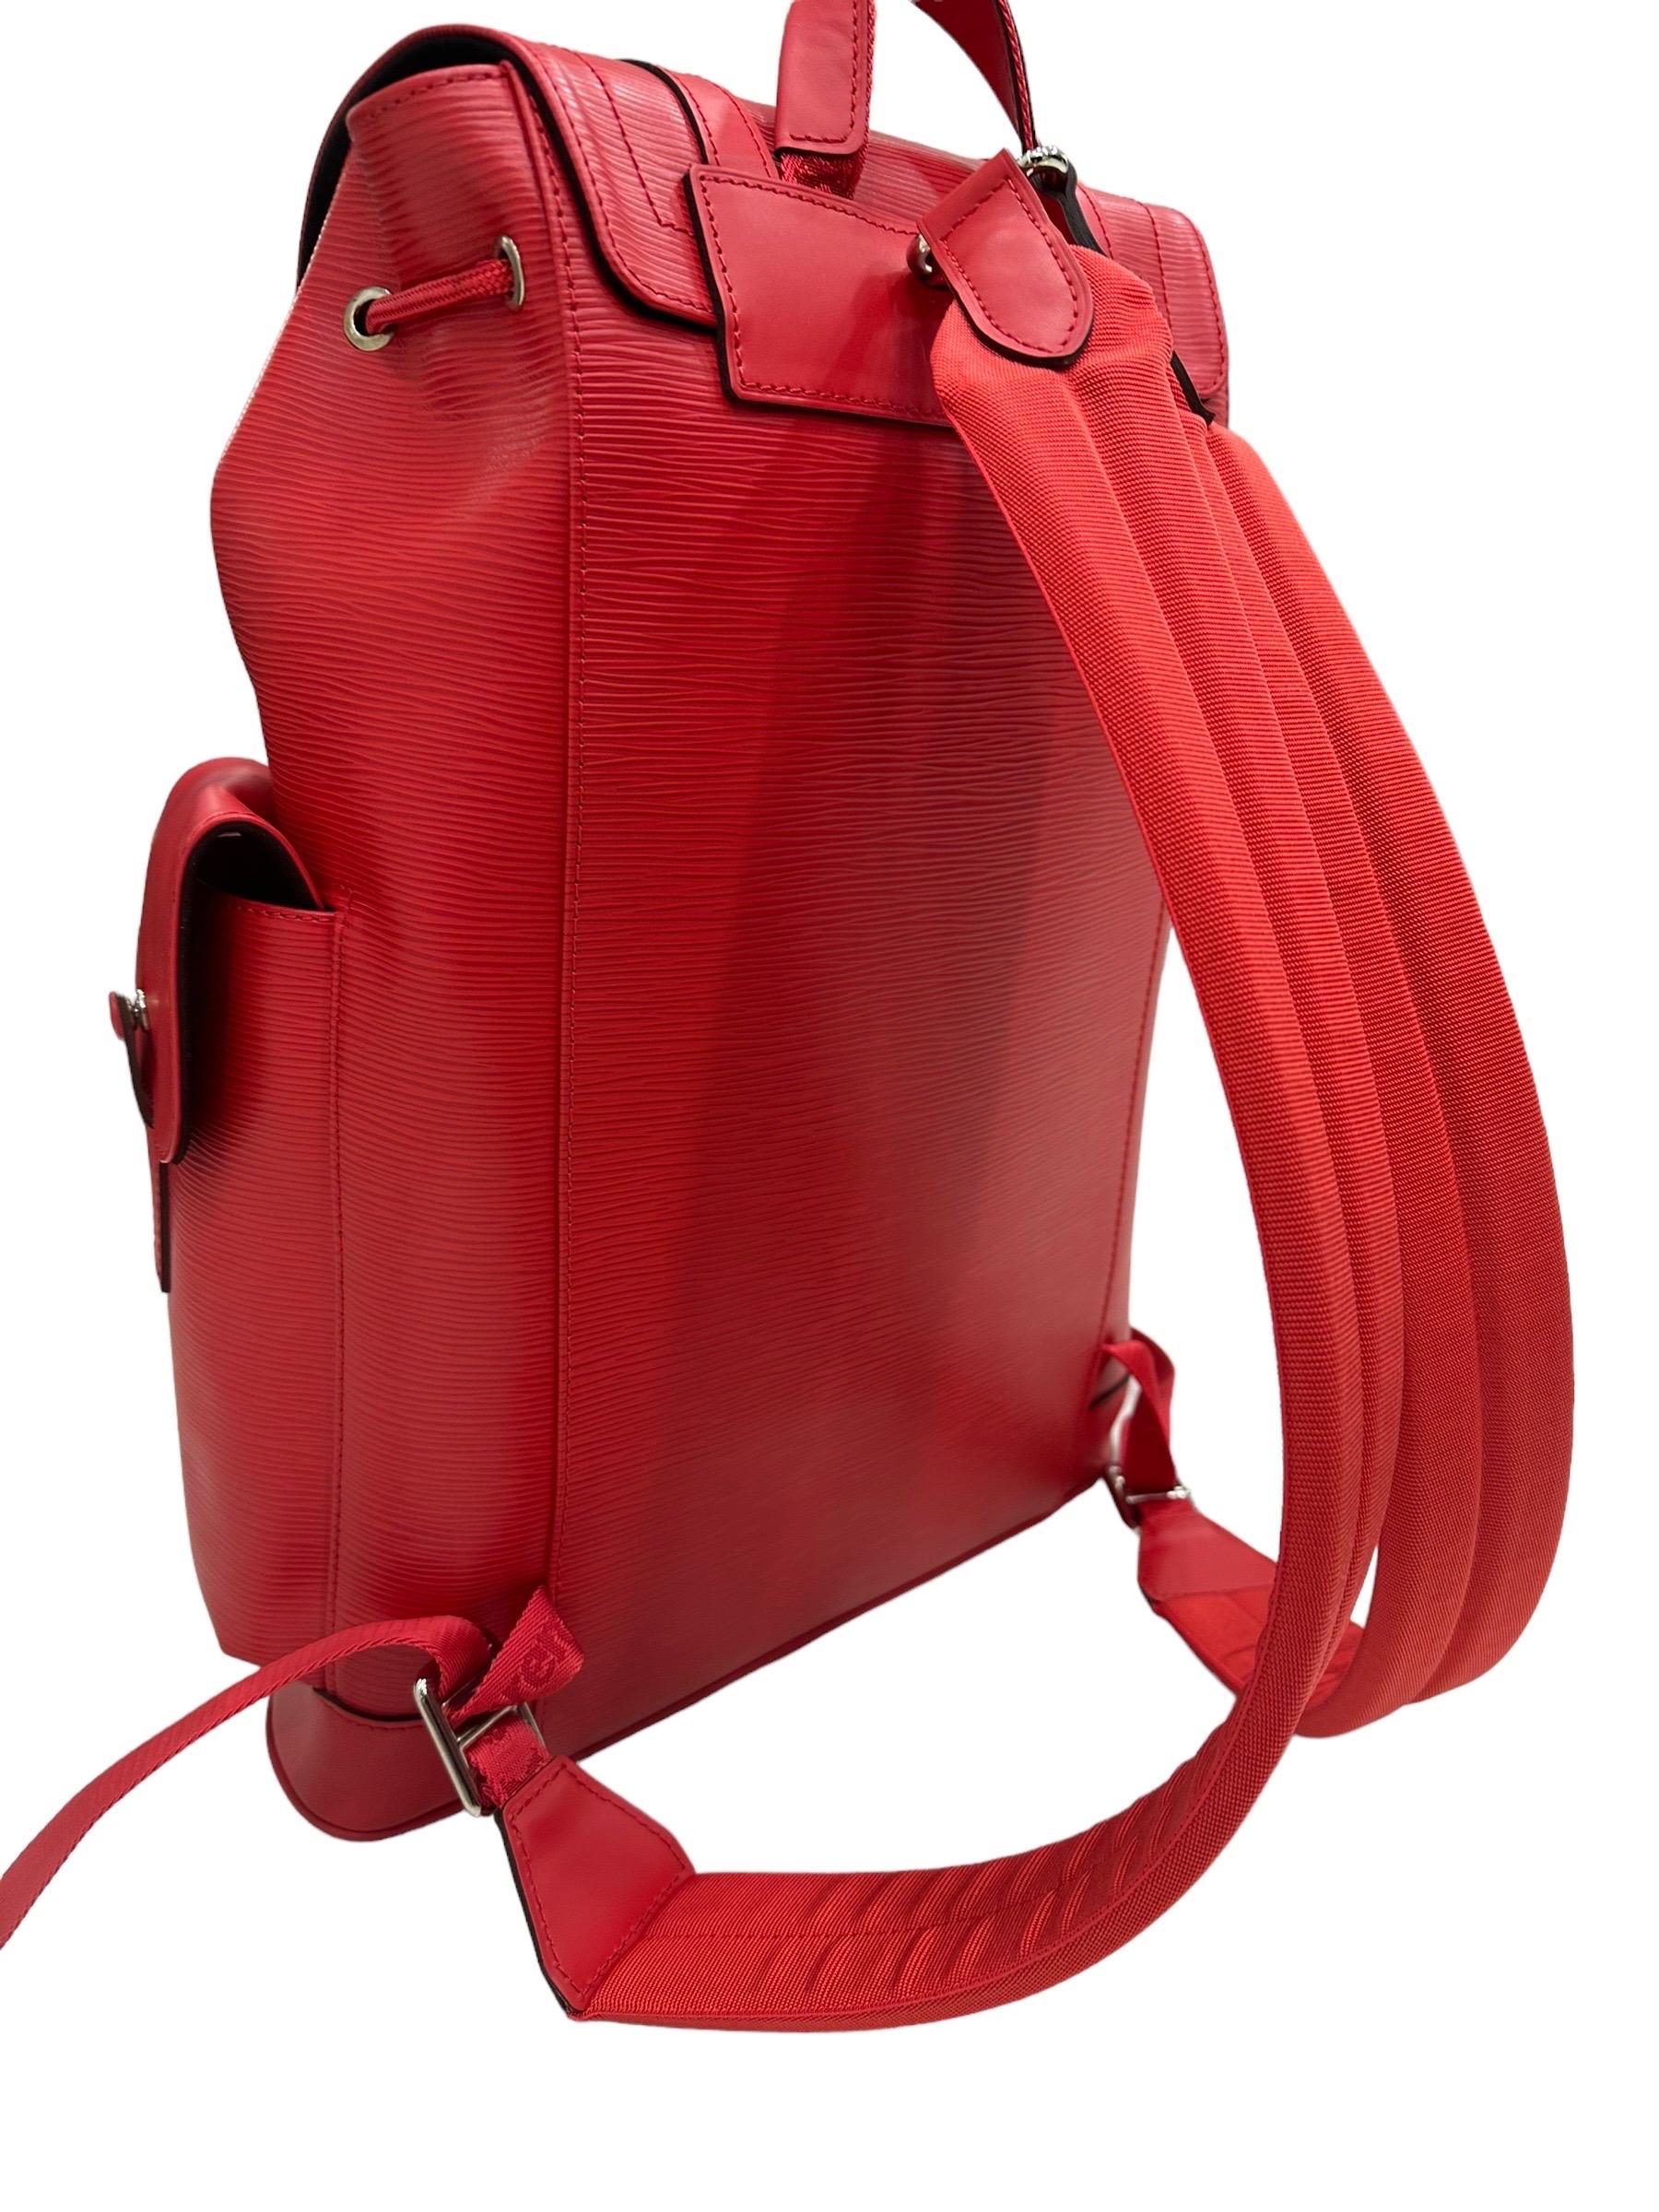 Louis Vuitton Christopher Backpack x Supreme Limited Edition Red Epi Leather 1